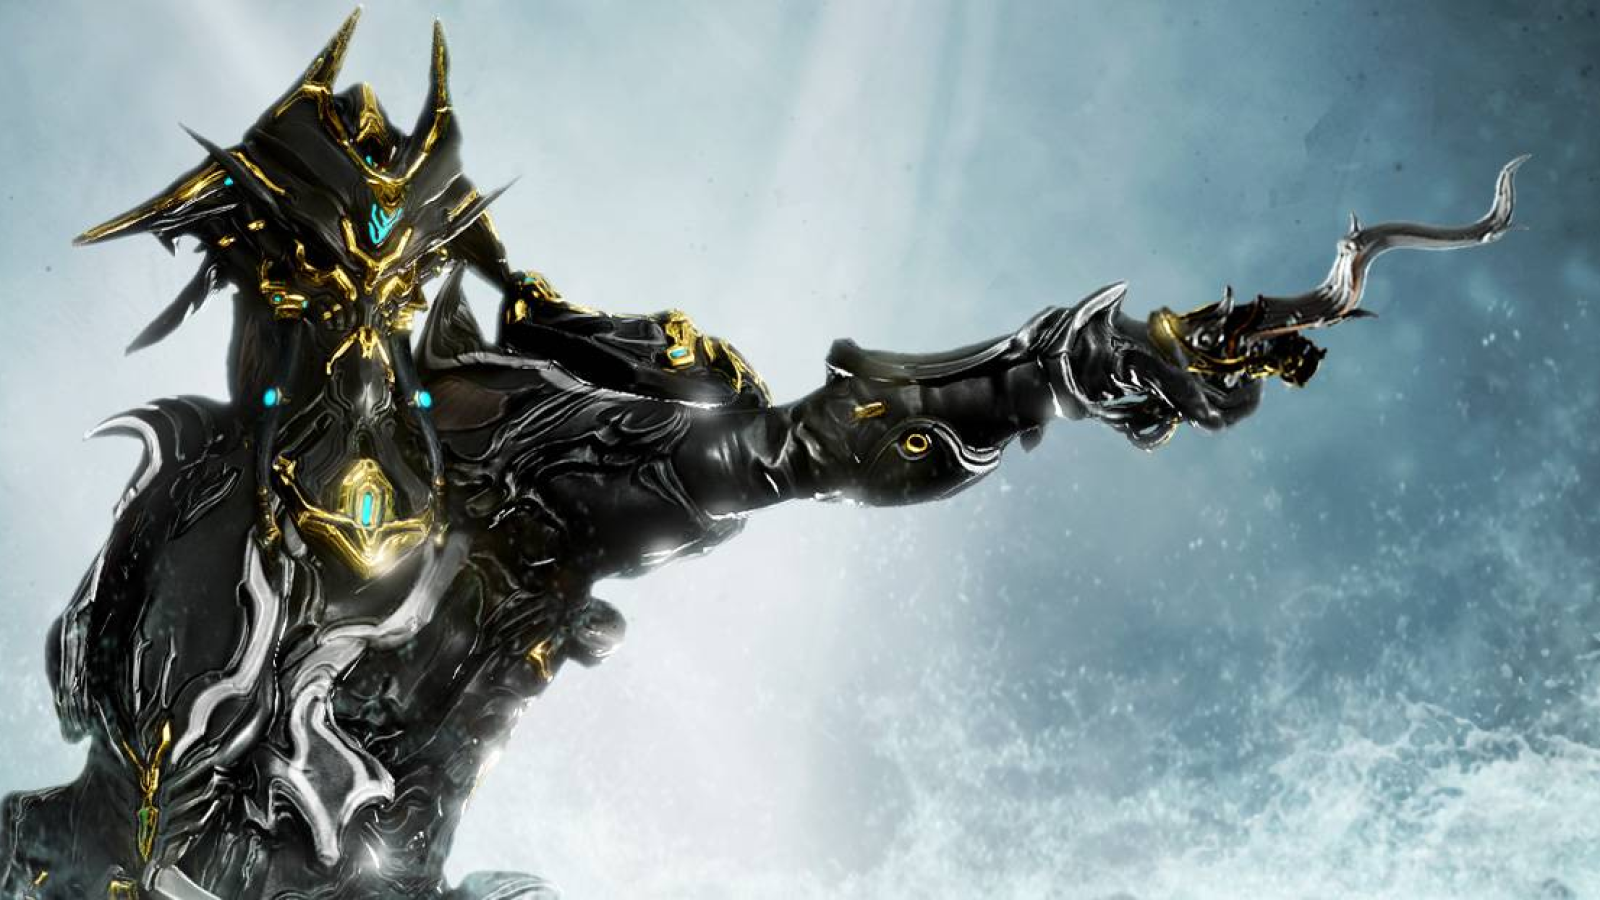 HYDROID PRIME ACCESS BEGINS AUGUST 29!